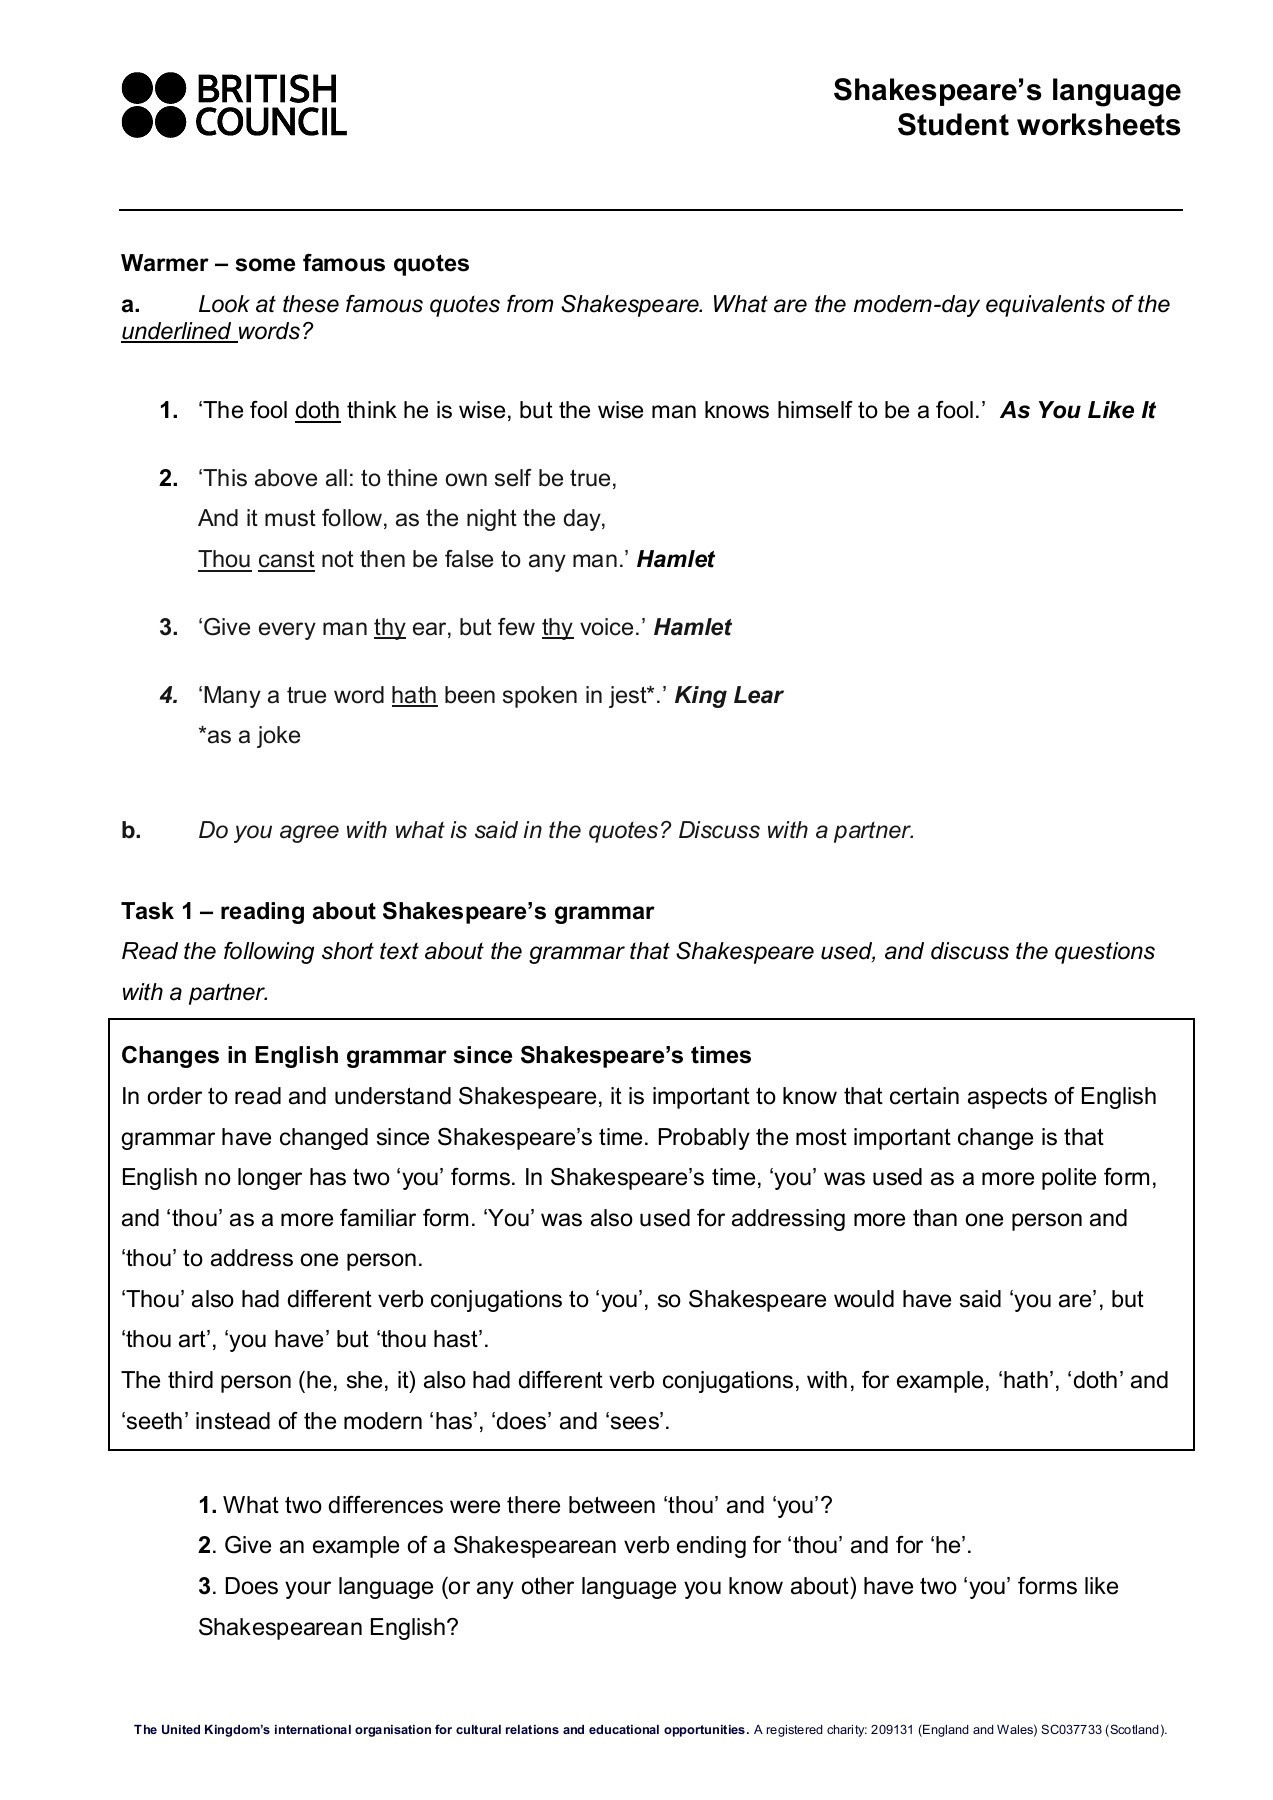 Shakespeare s Language Student Worksheets Pages 1 4 Text Db excel